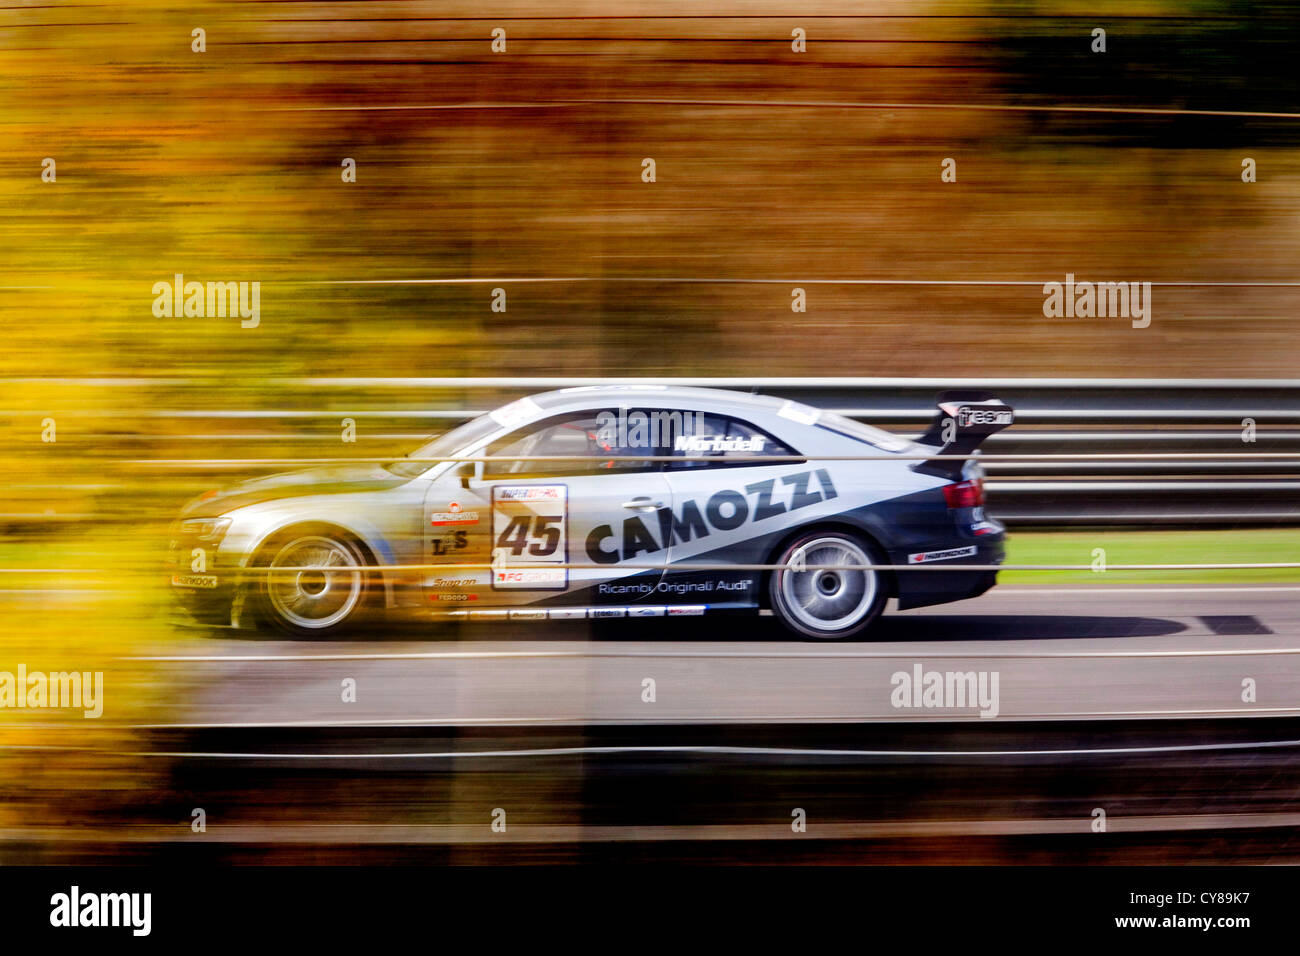 Car racing at Superstars race day on Pergusa Race track, Enna, Sicily, Italy Stock Photo